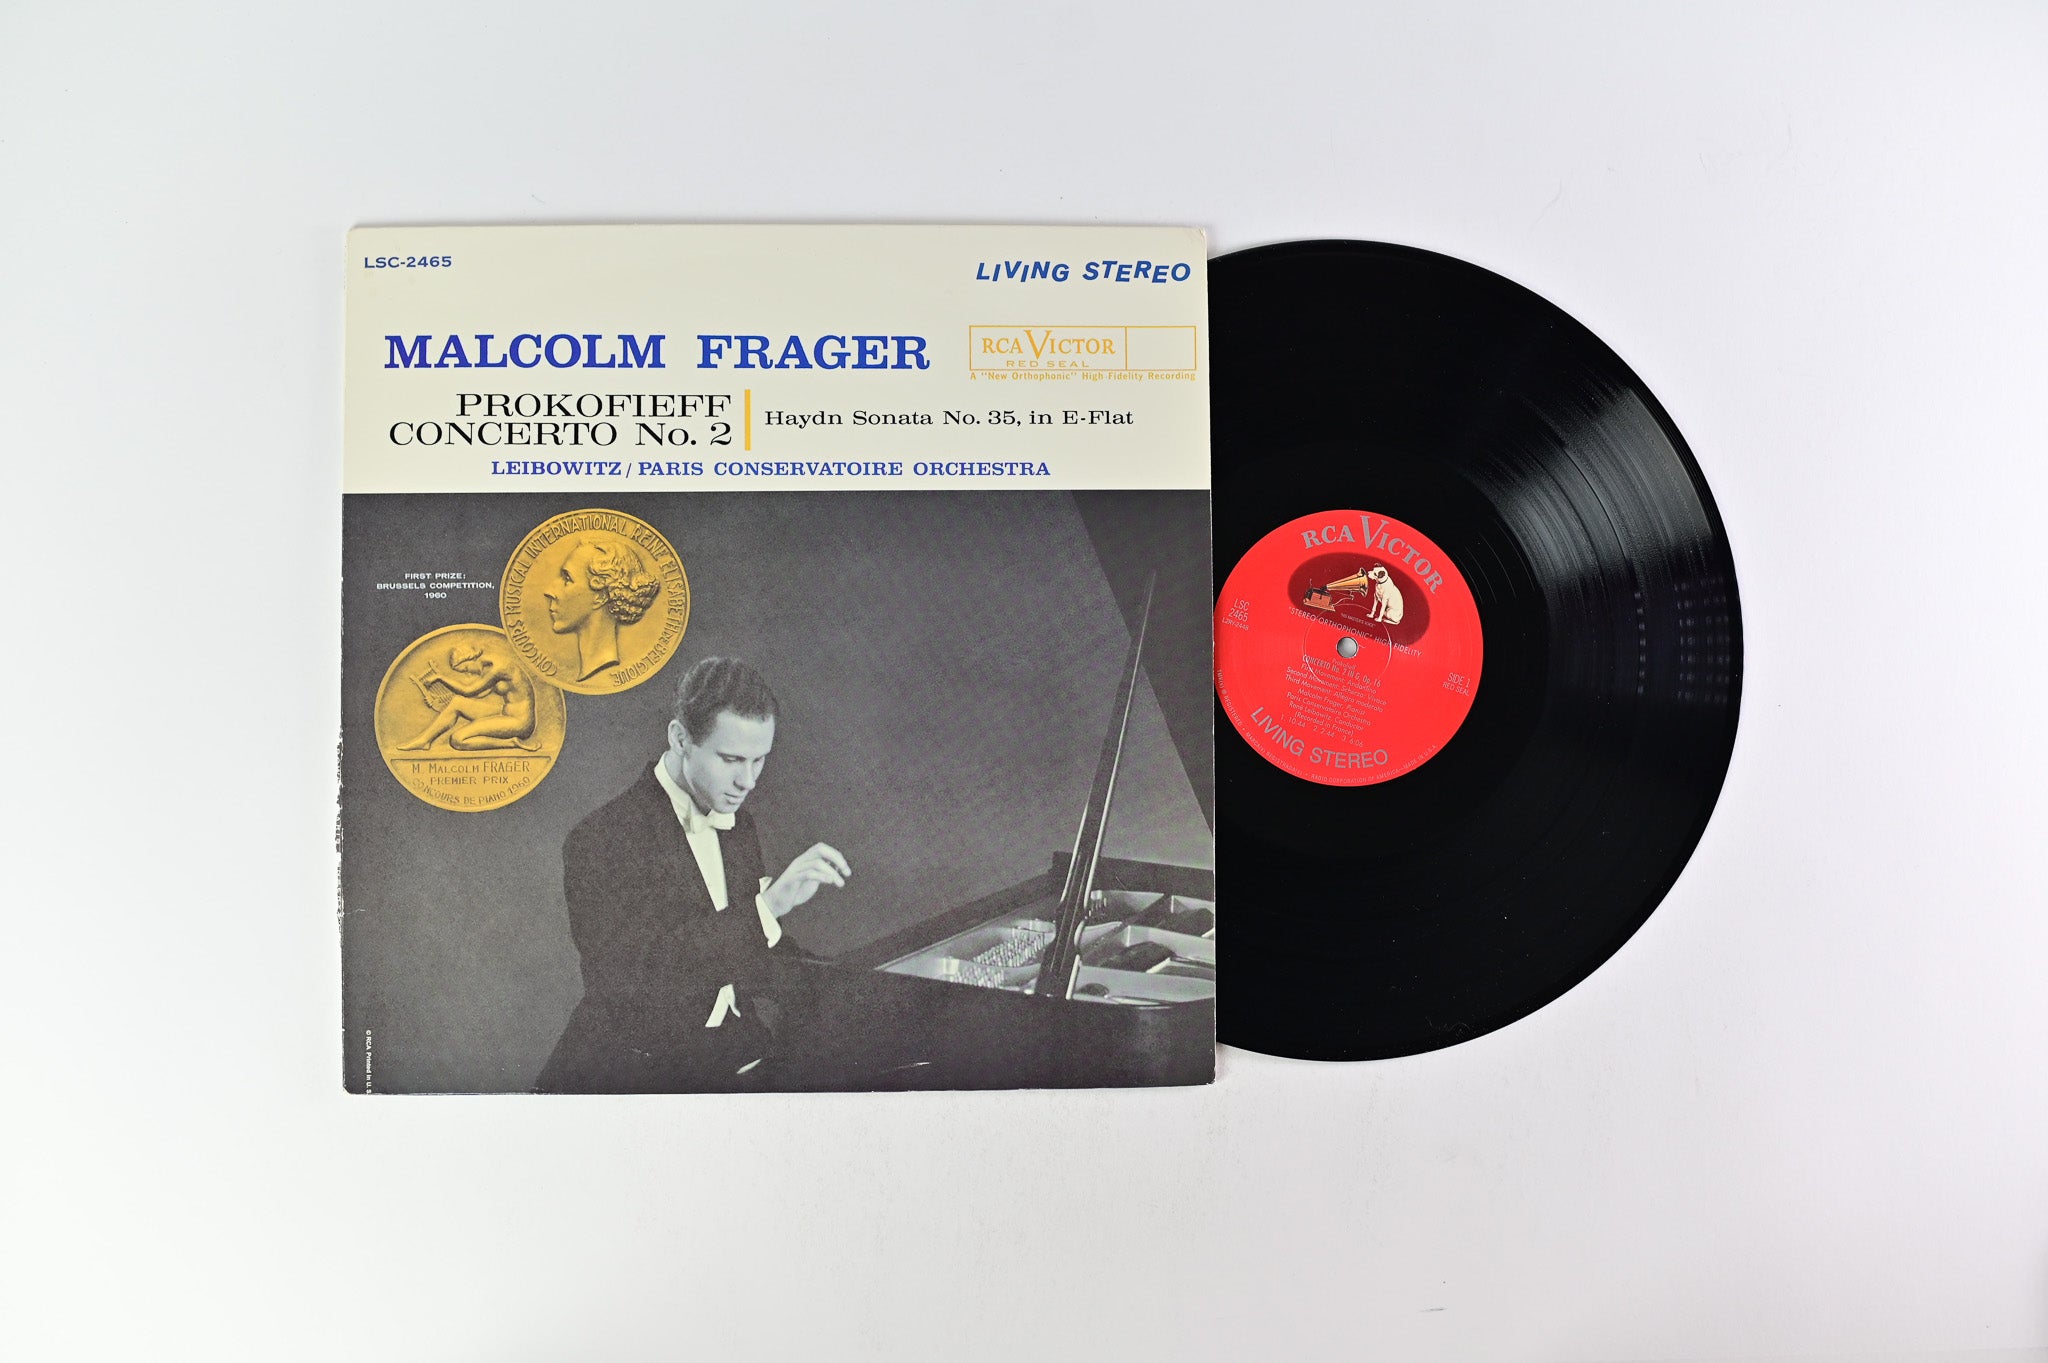 Malcolm Frager - Prokofieff Concerto No. 2 Reissue on Classic Records